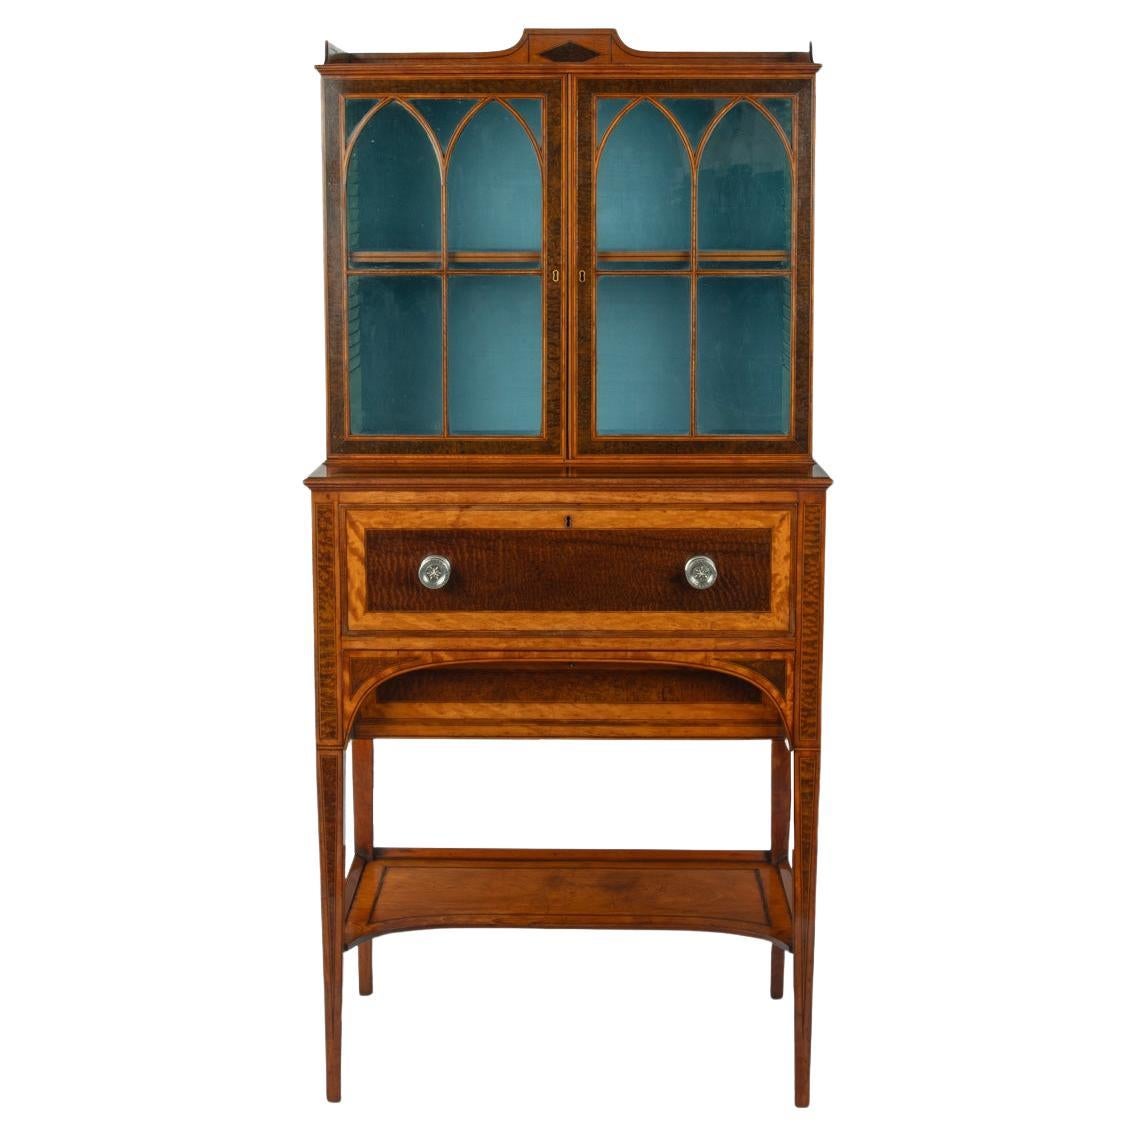 A fine late George III satinwood and snakewood secretaire cabinet For Sale